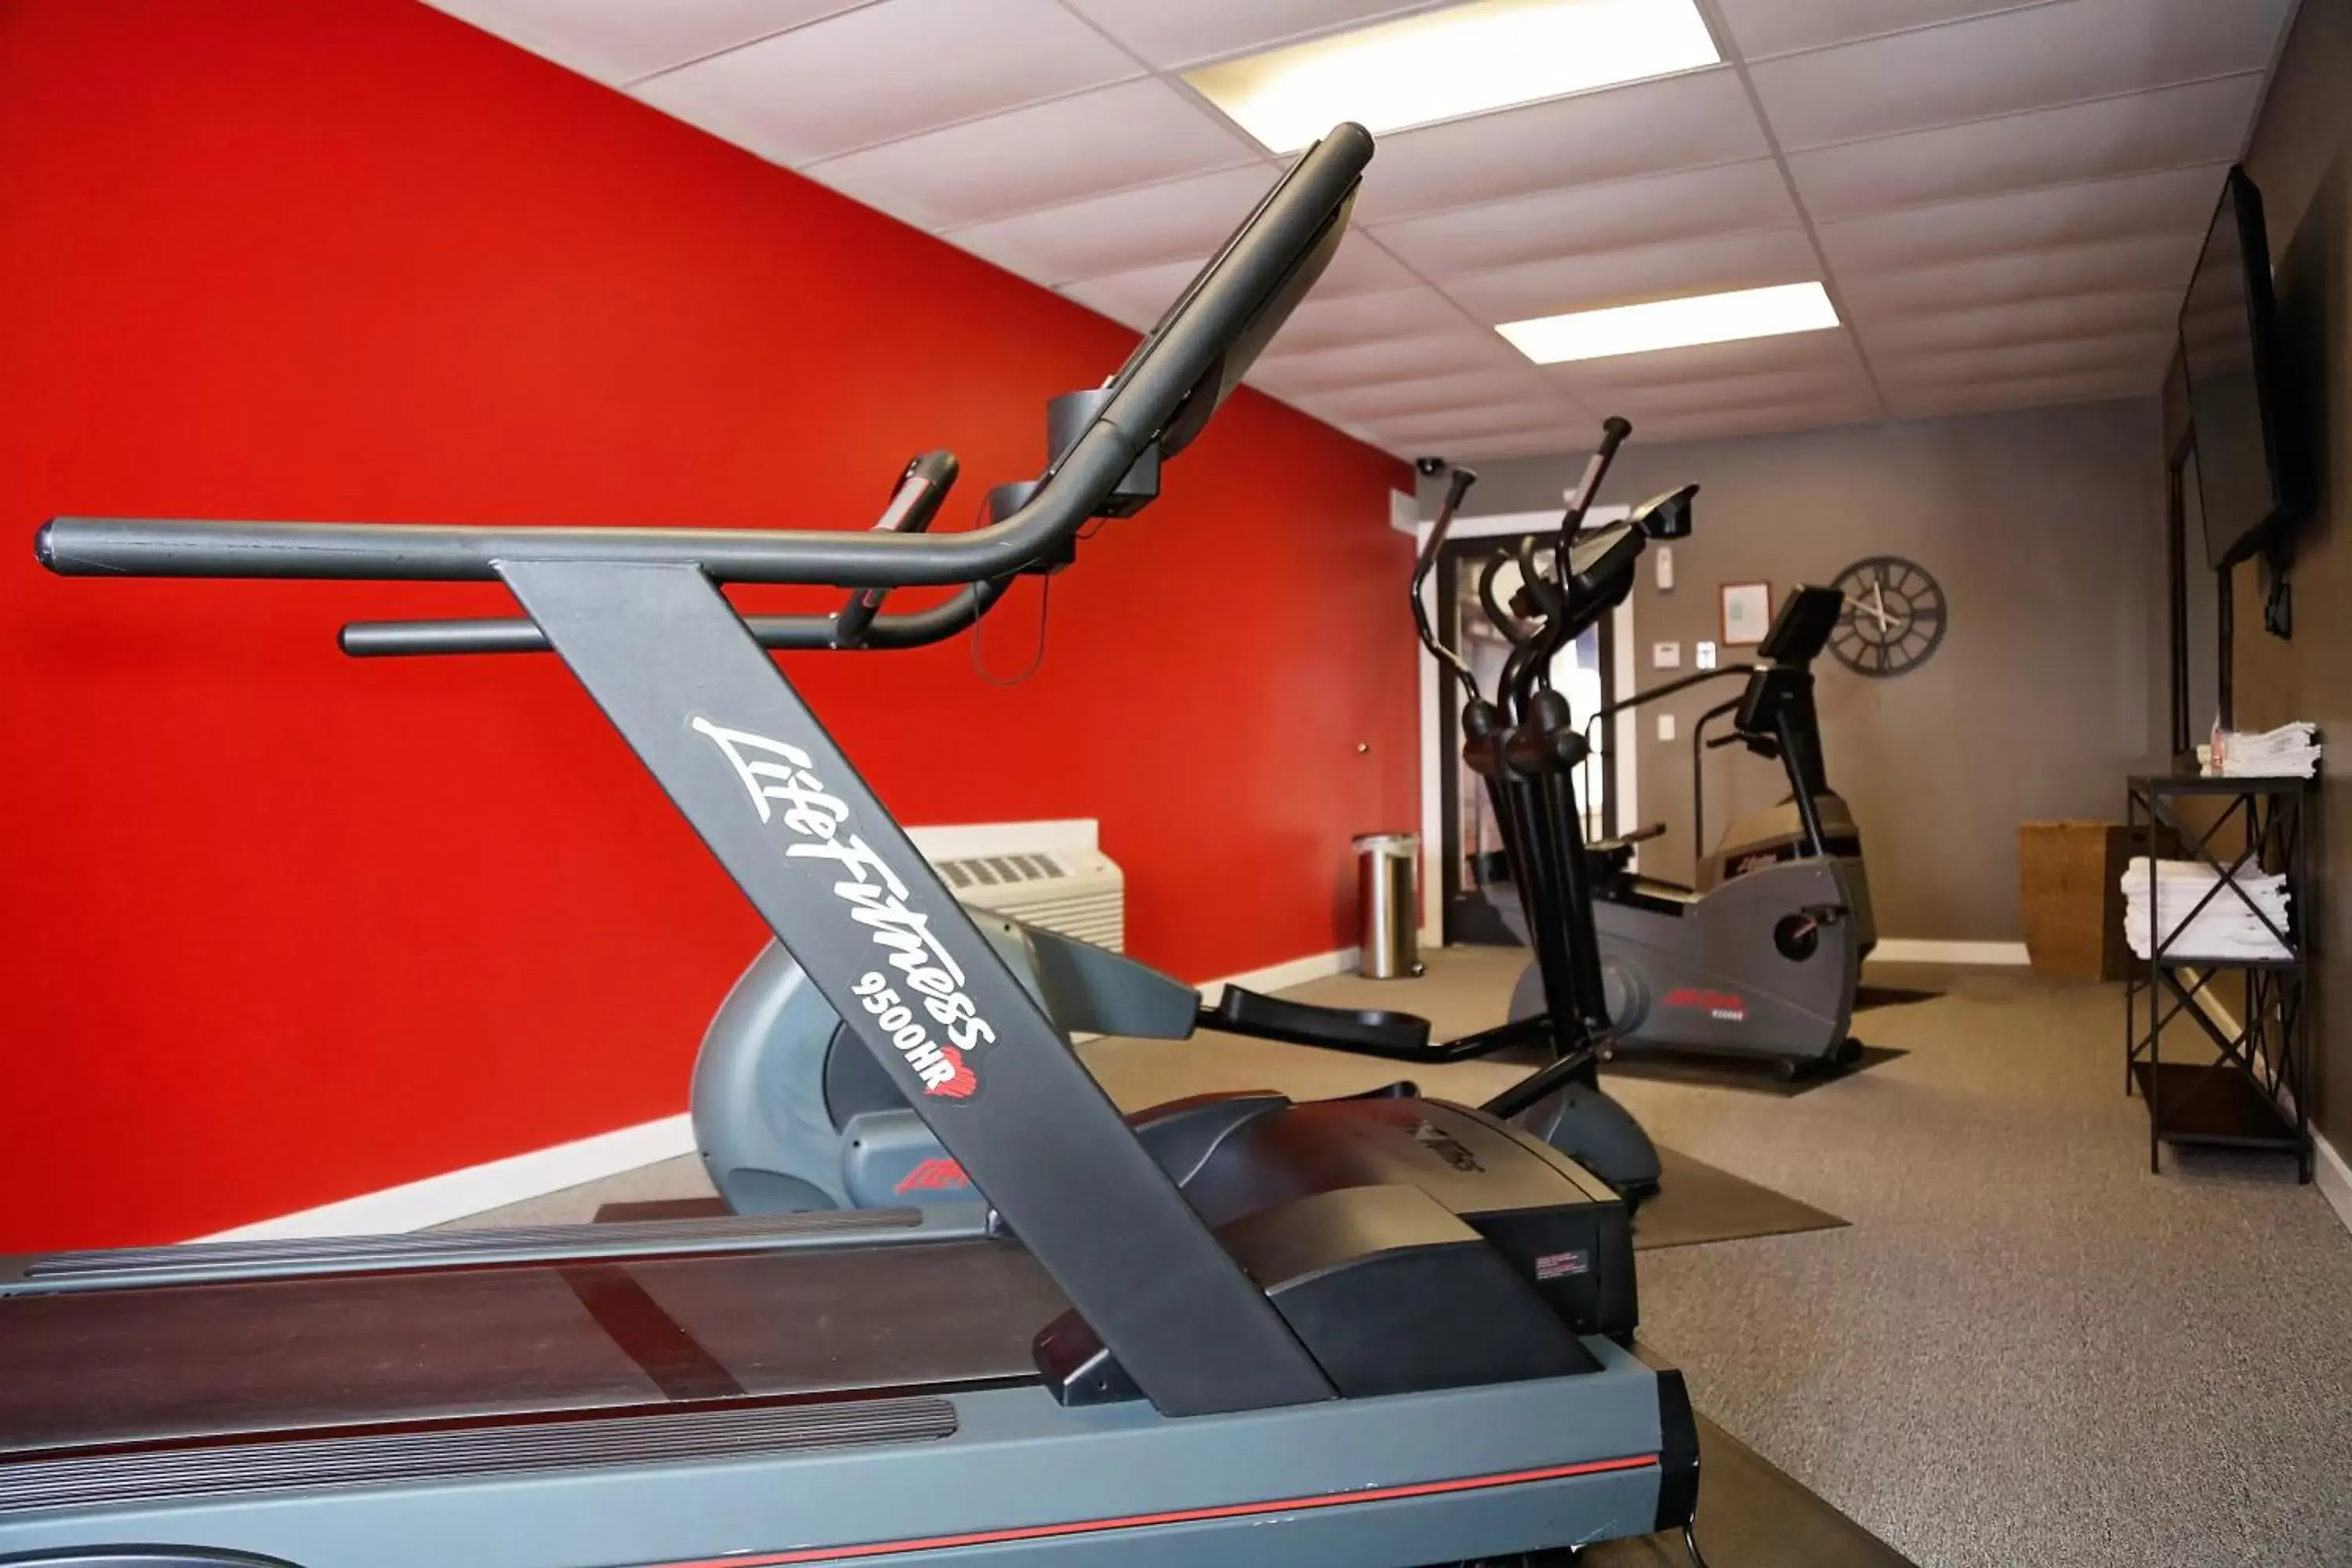 Fitness centre/facilities in Billings Hotel & Convention Center